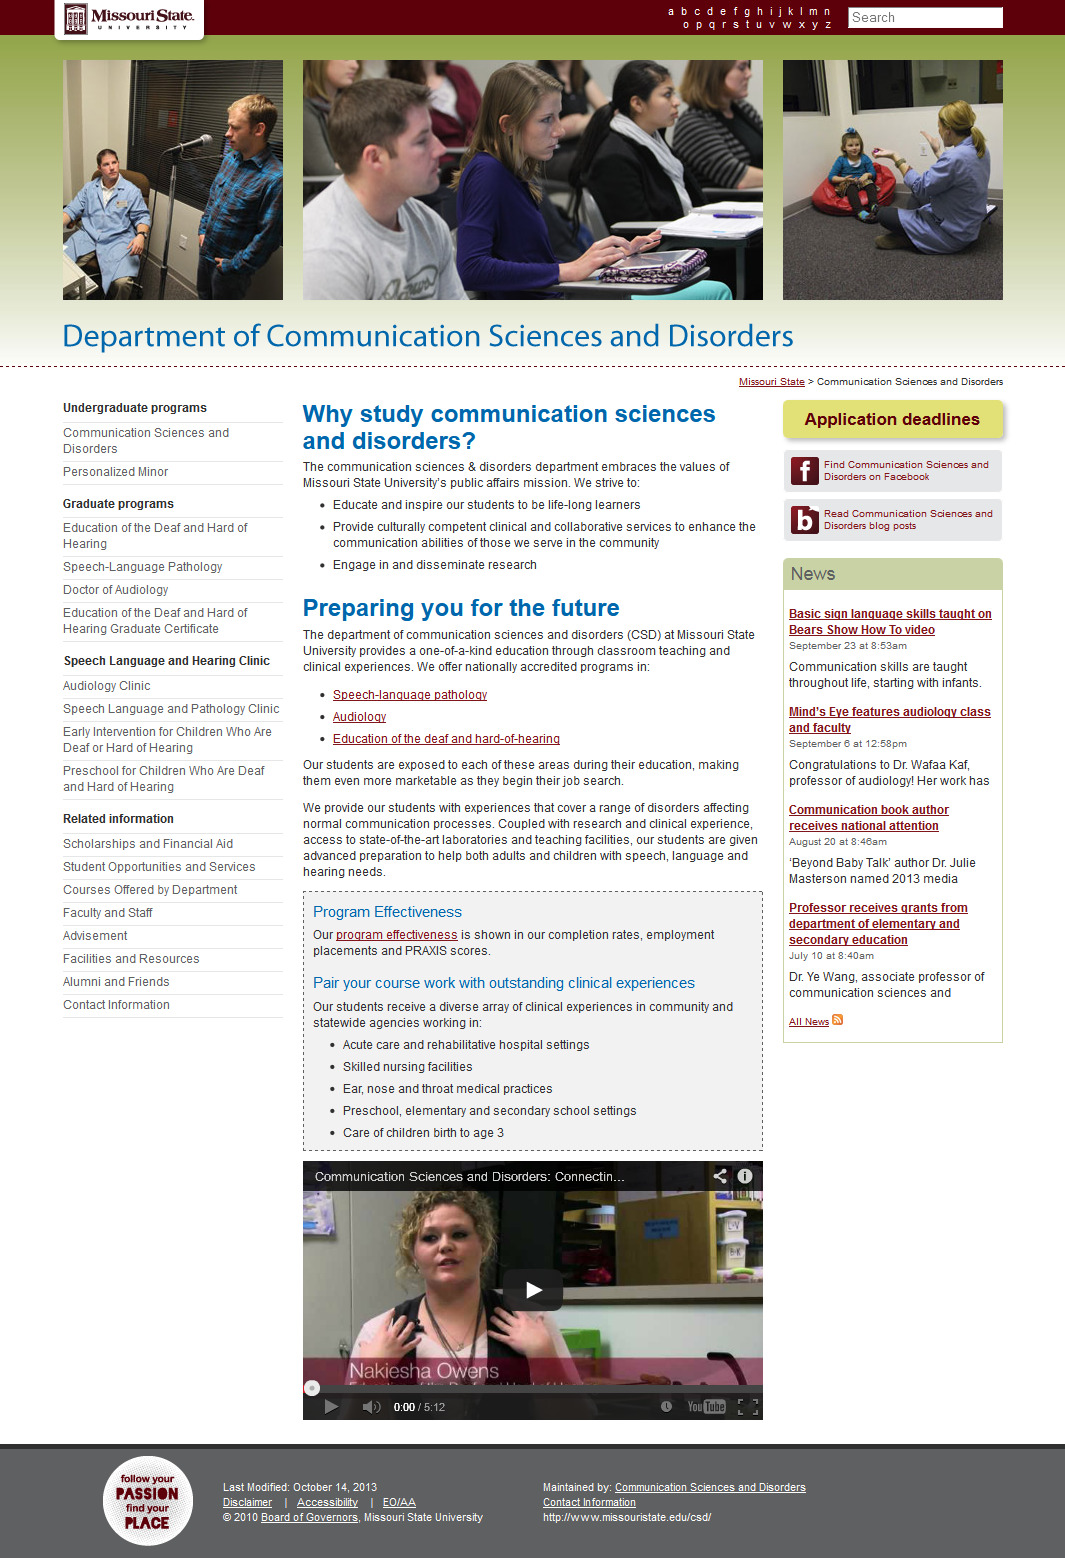 Communication Sciences and Disorders website